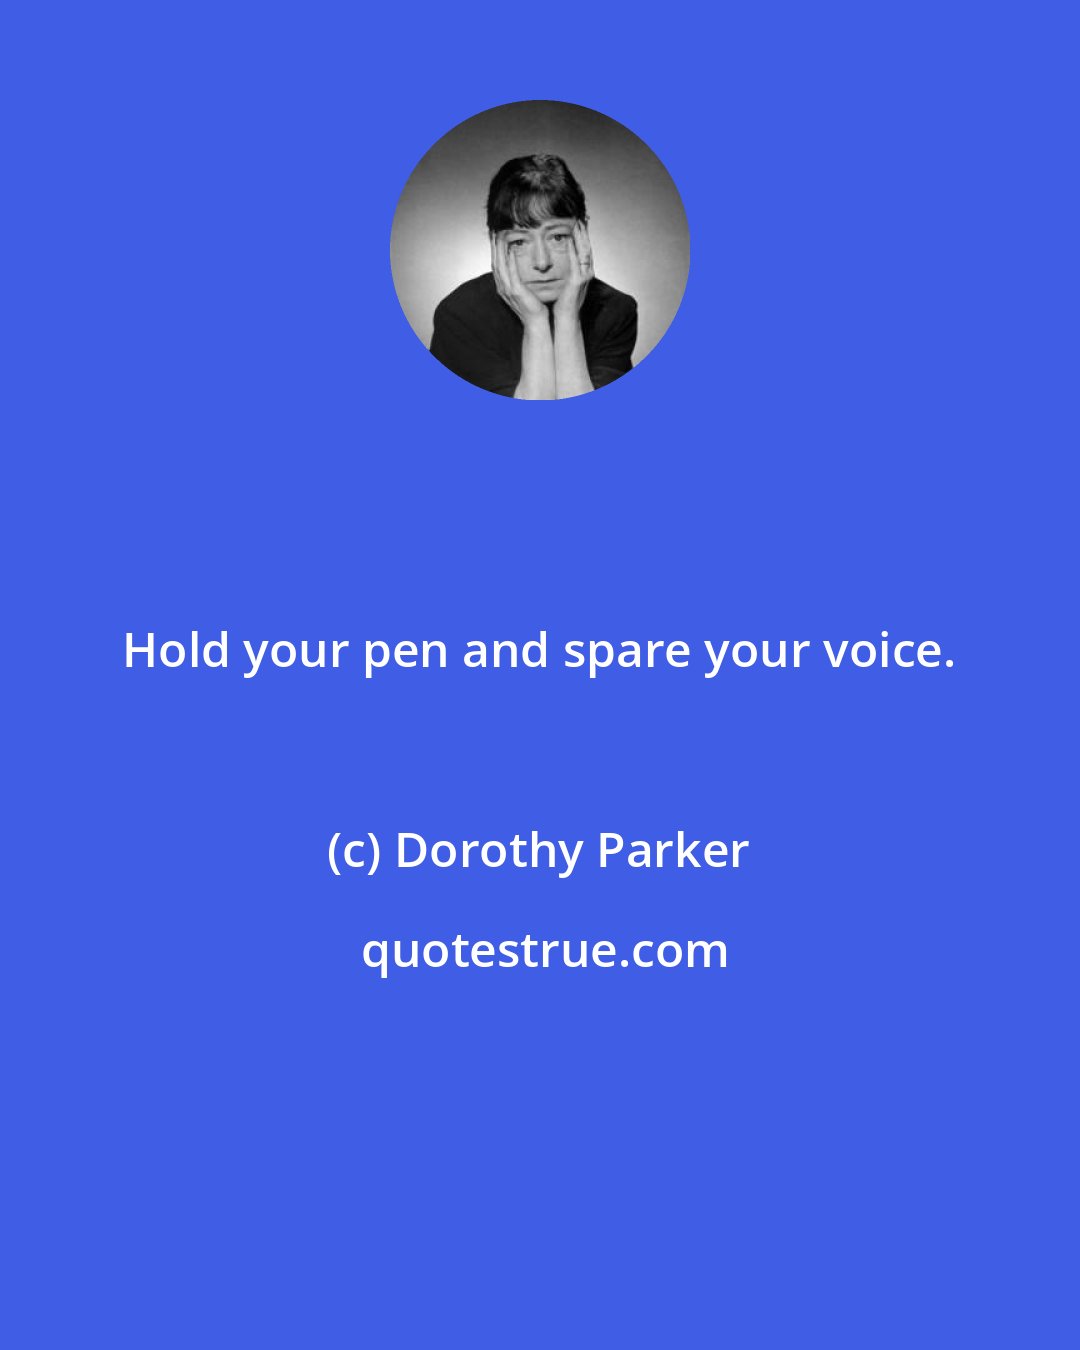 Dorothy Parker: Hold your pen and spare your voice.